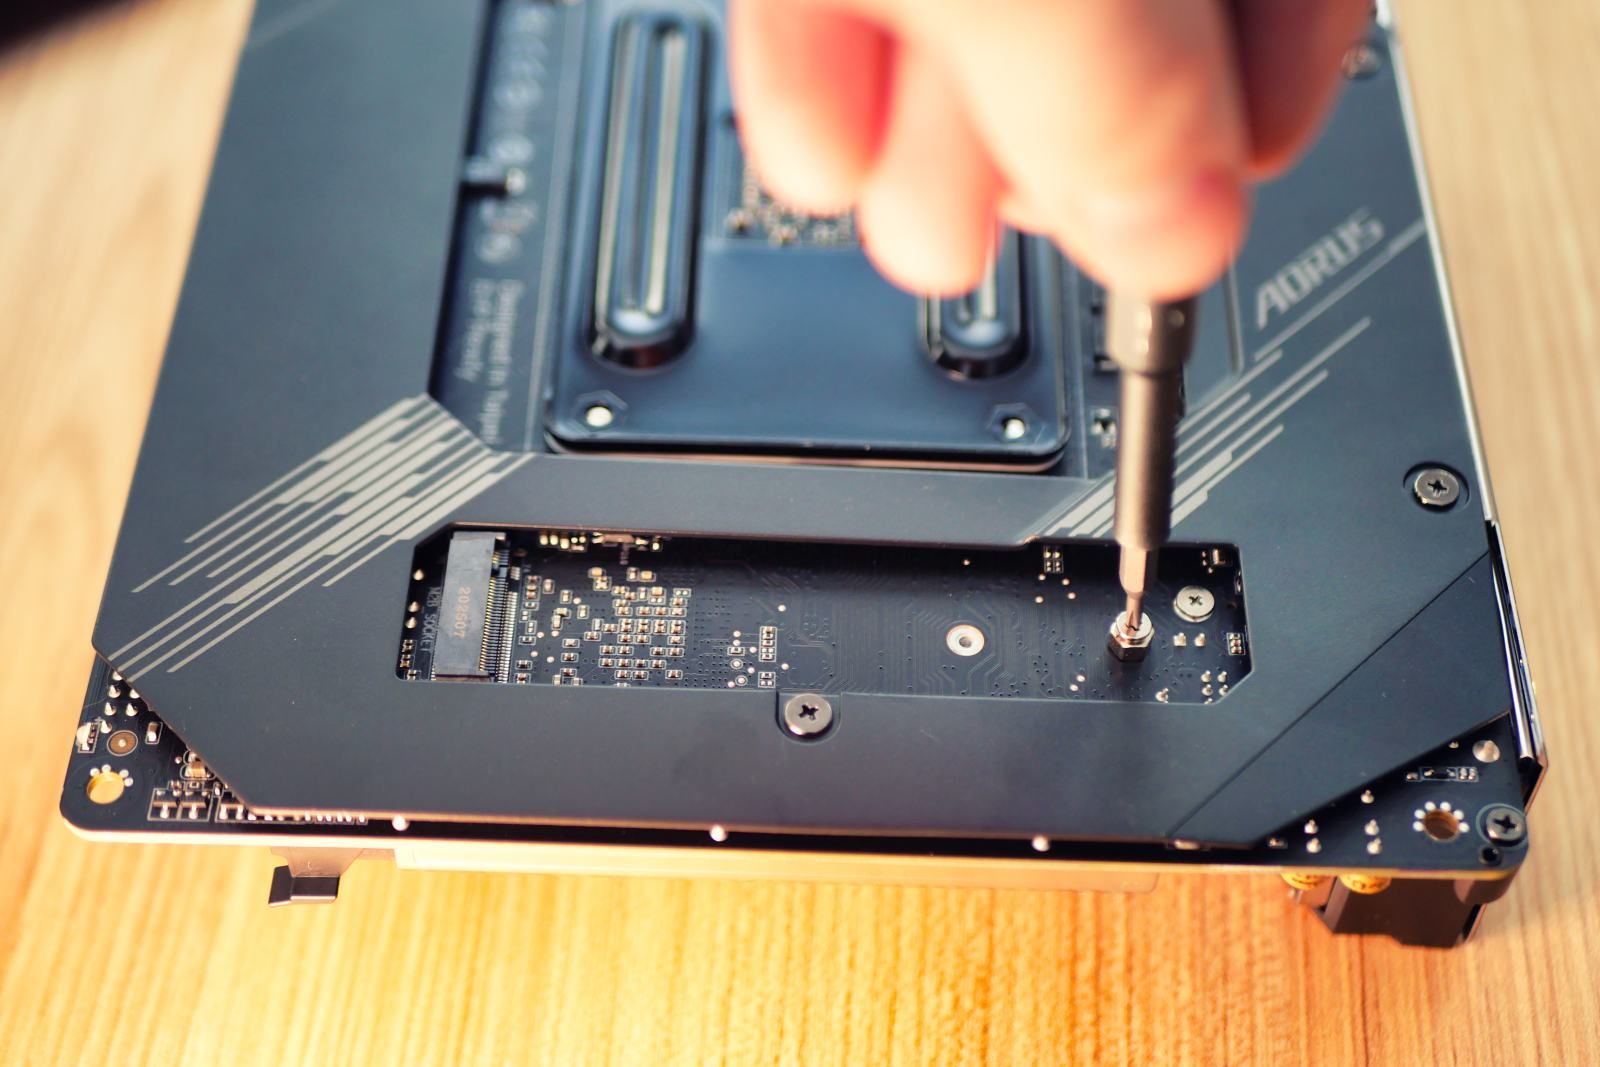 How to install an SSD in a gaming PC photo 23